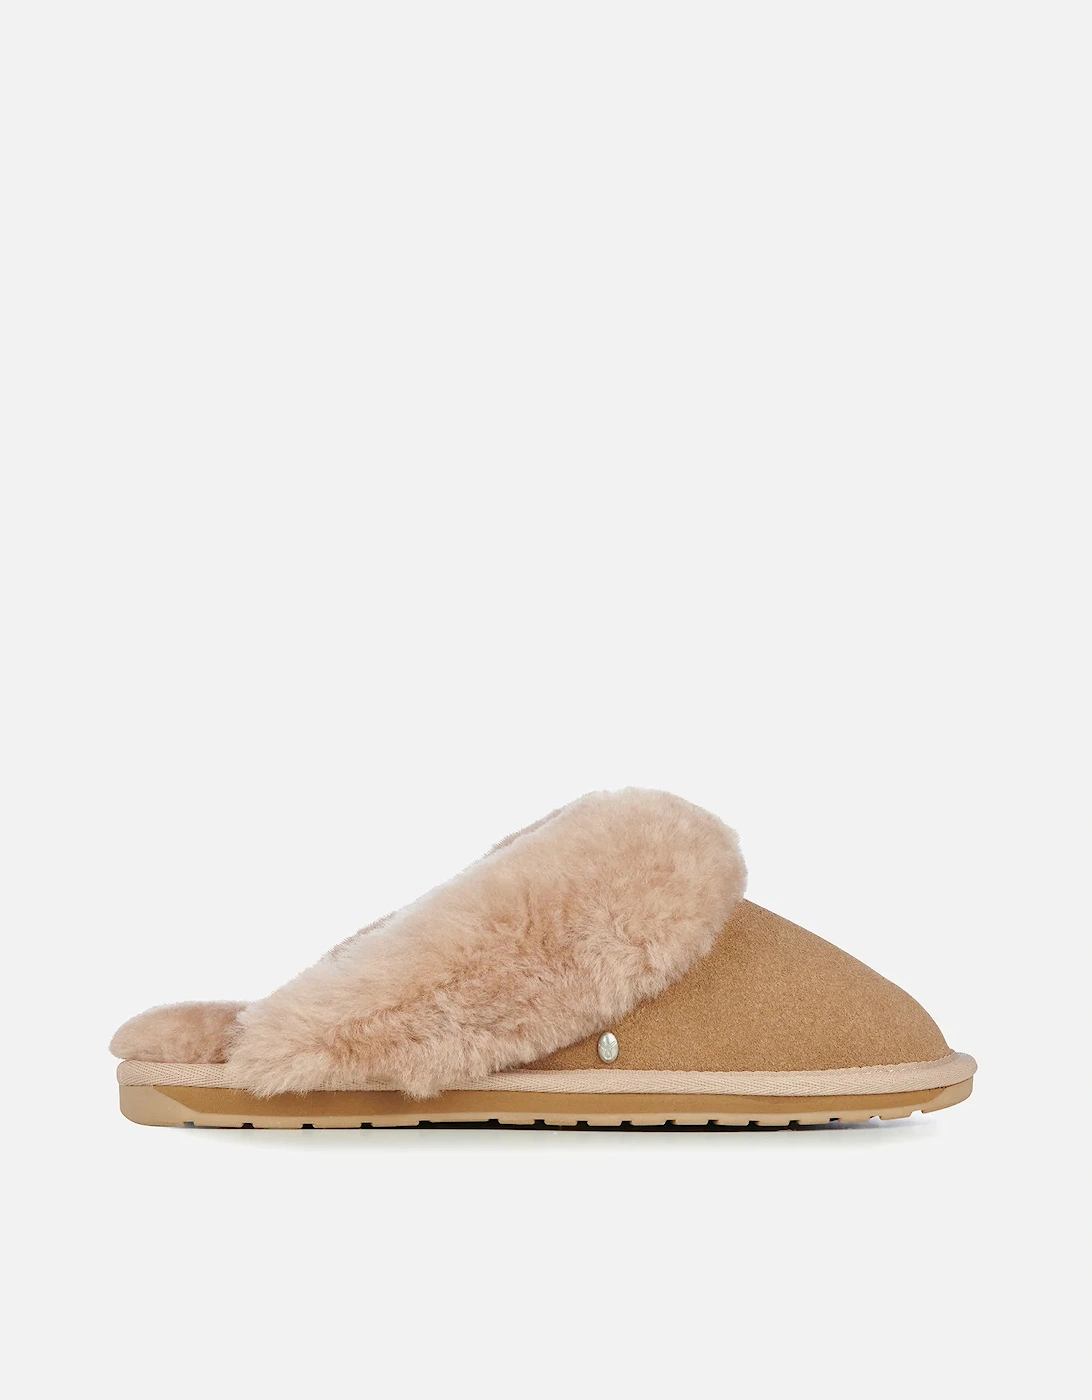 Australia Jolie Suede and Shearling Slippers - Australia - Home - Women's Shoes - Women's Slippers - Australia Jolie Suede and Shearling Slippers